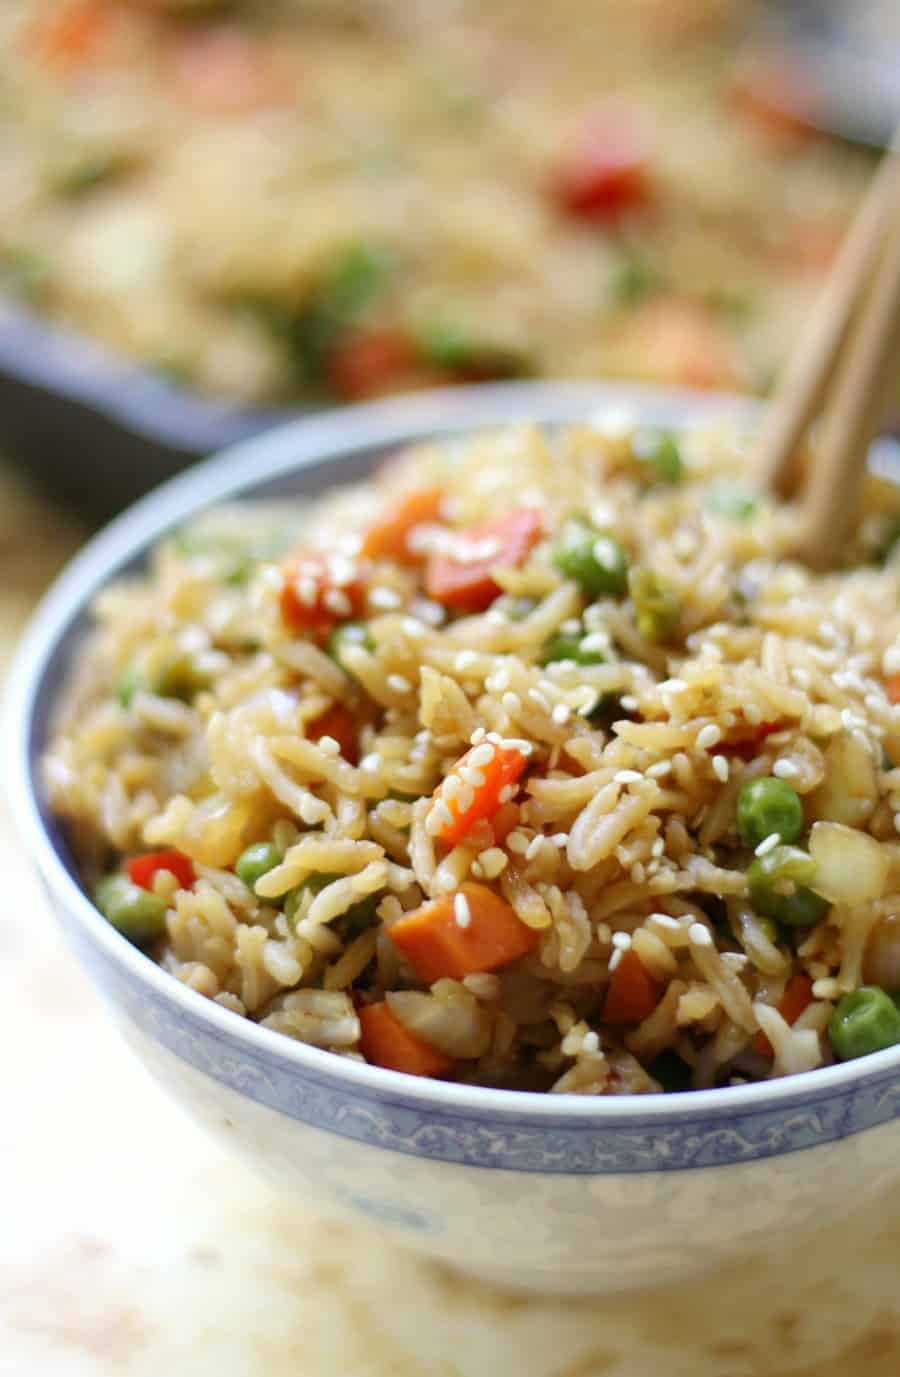 Classic Vegetable Fried Rice (Gluten-Free, Vegan, Allergy-Free) | Strength and Sunshine @RebeccaGF666 A super quick and easy Classic Vegetable Fried Rice recipe so you don't need to order takeout! It's gluten-free, vegan, top 8 allergy-free, healthy, and full of veggies! A perfect side dish for using leftover rice and transforming it into a delicious lunch or dinner!
